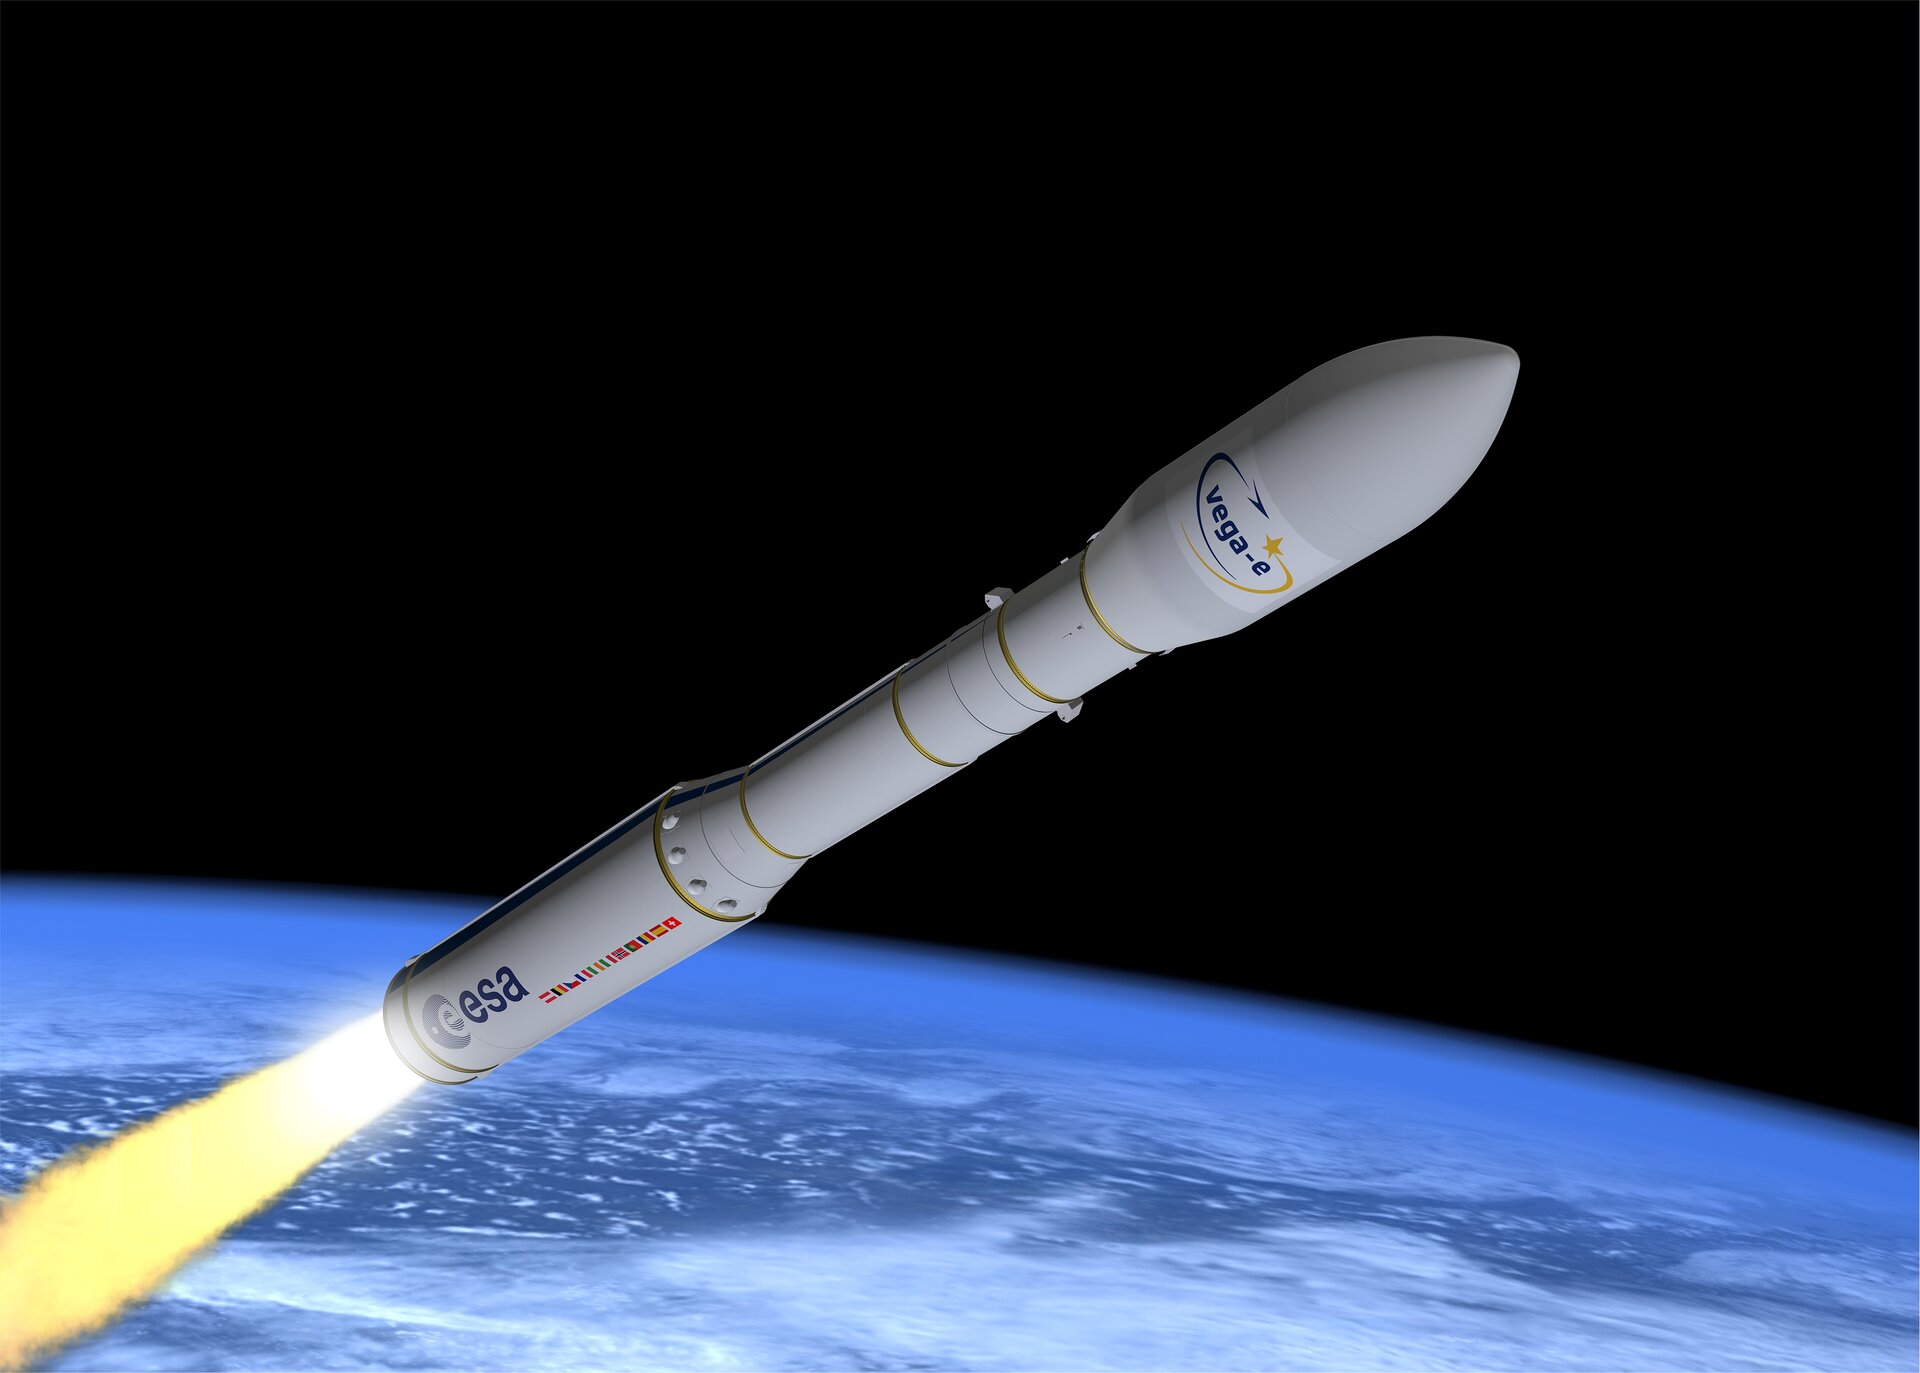 Vega-E will be a three-stage launcher featuring the innovative M10 upper stage engine